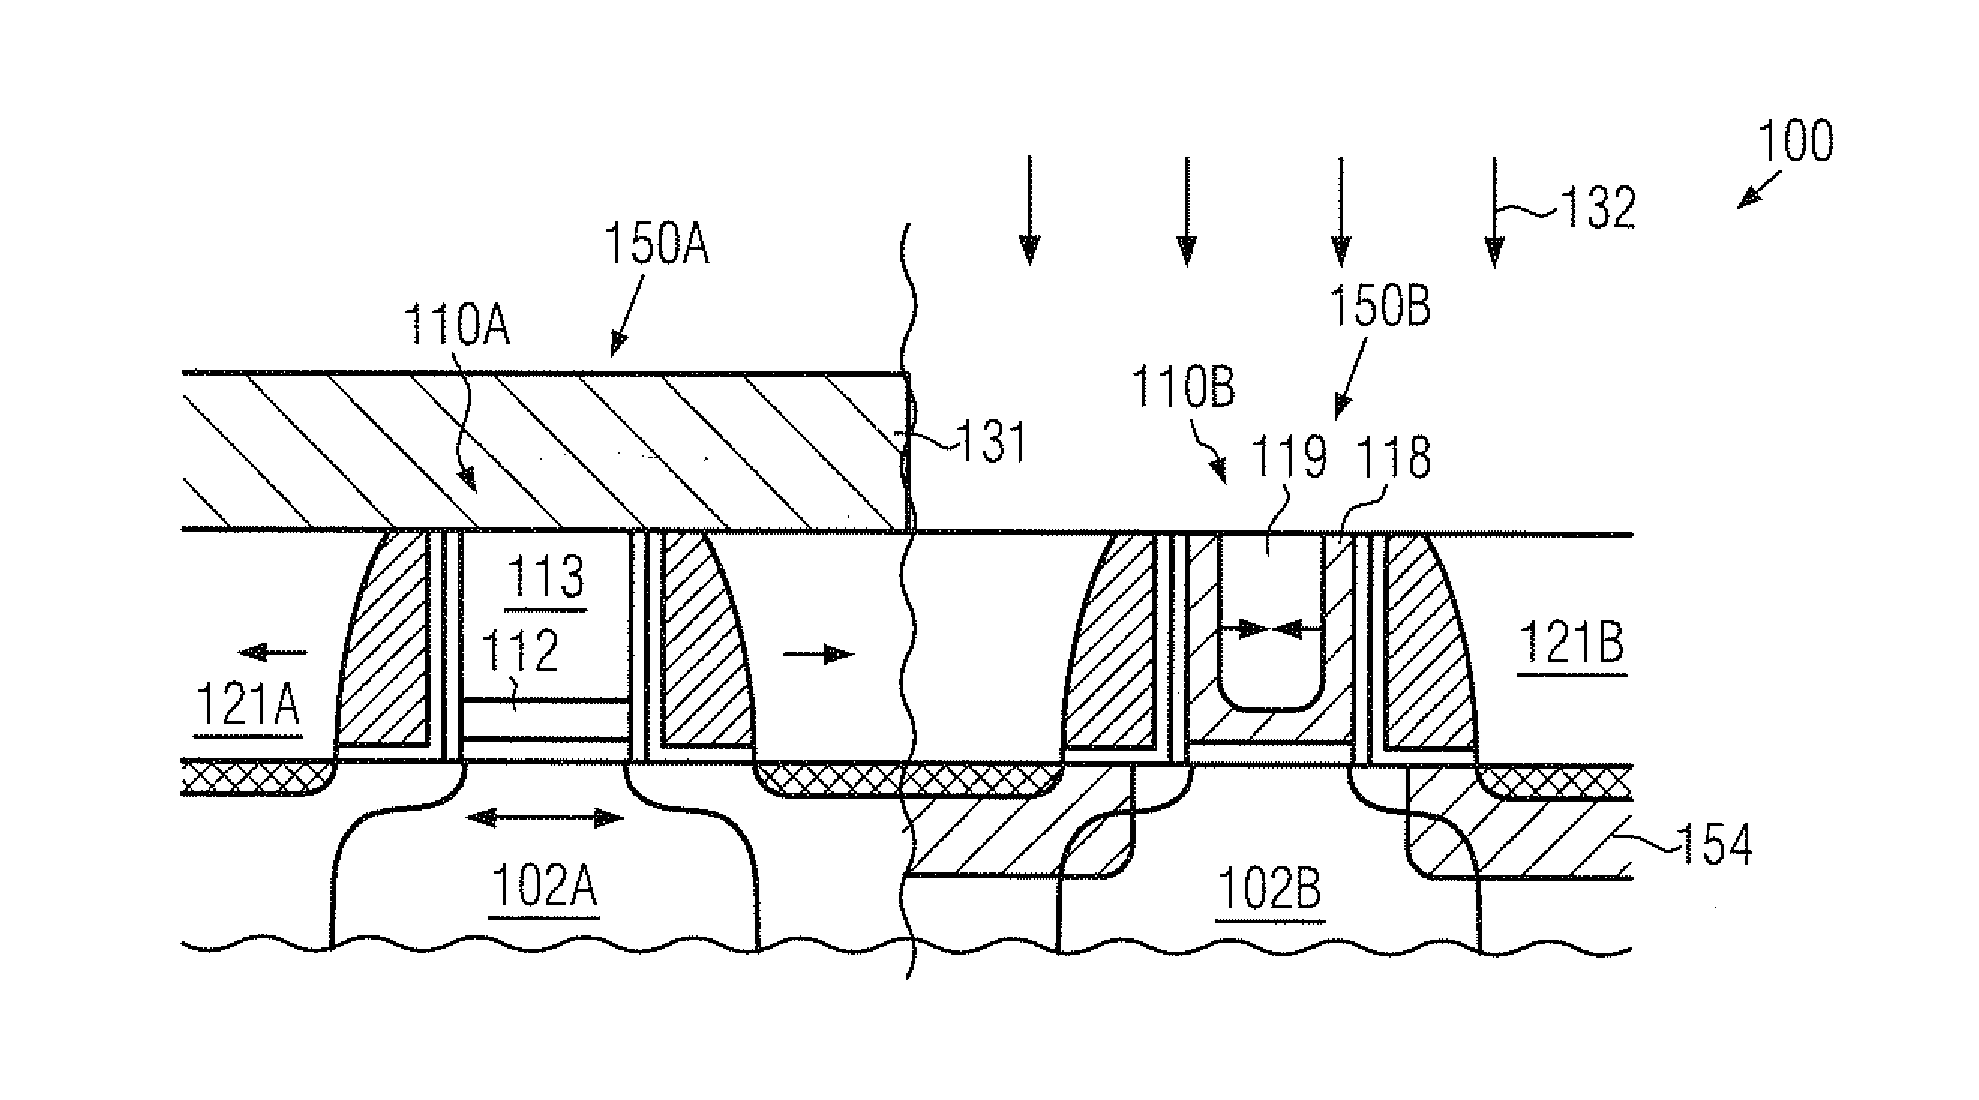 High-k metal gate electrode structures formed at different process stages of a semiconductor device